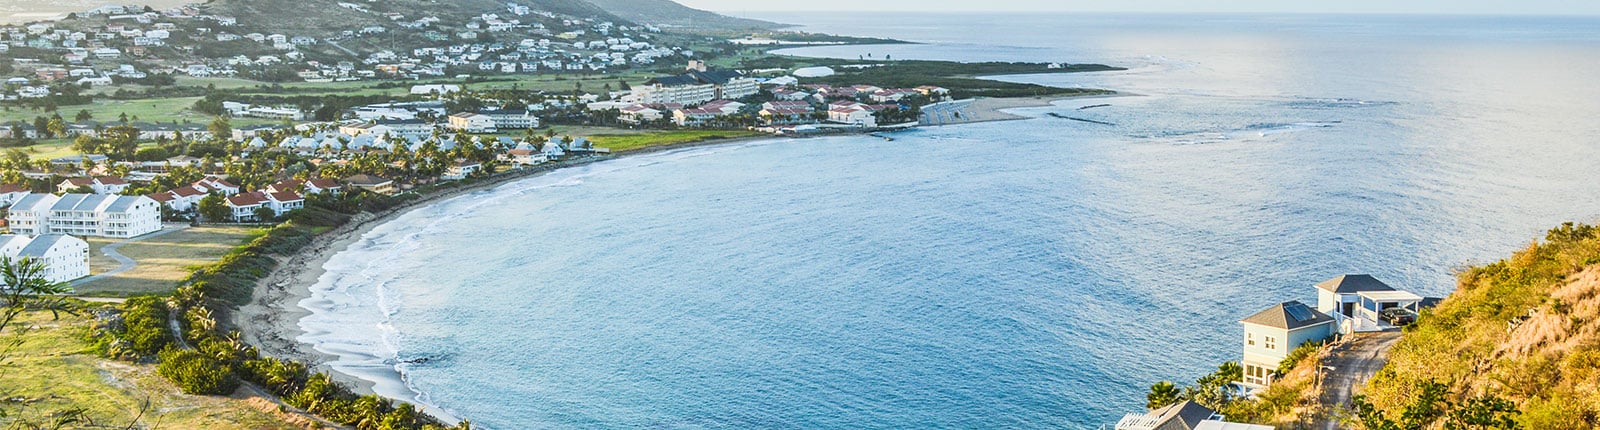 Looking down the hillside to the coastline of St. Kitts